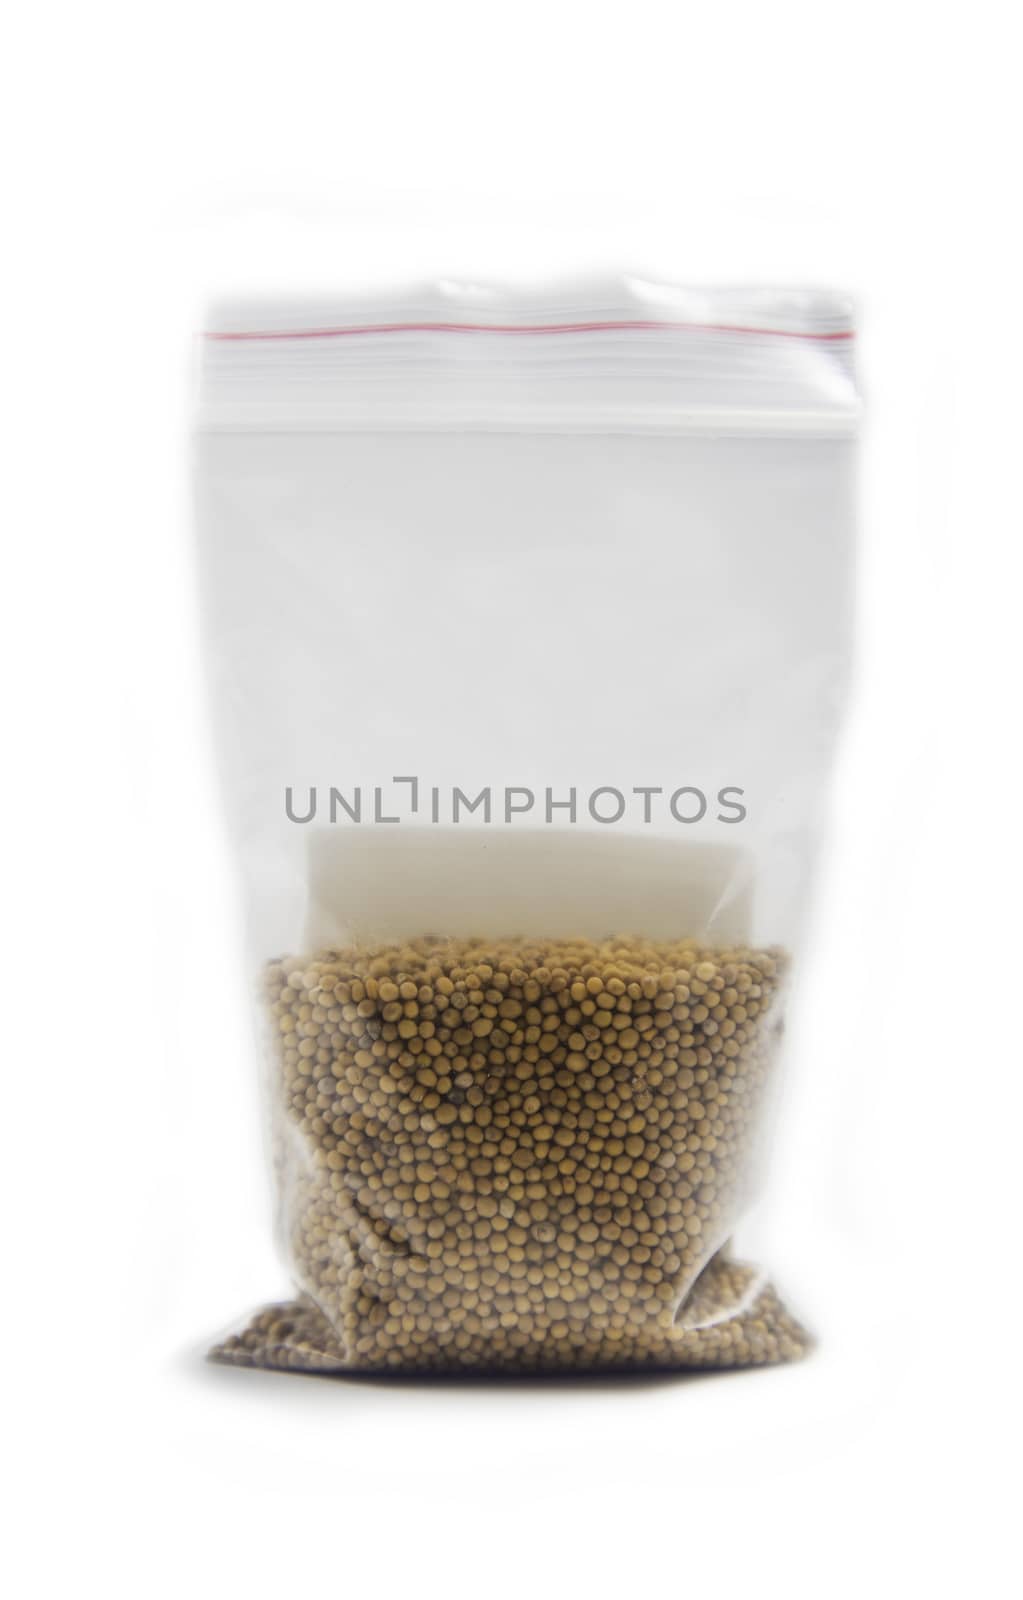 White mustard seeds for germination in bag isolated on a white background.